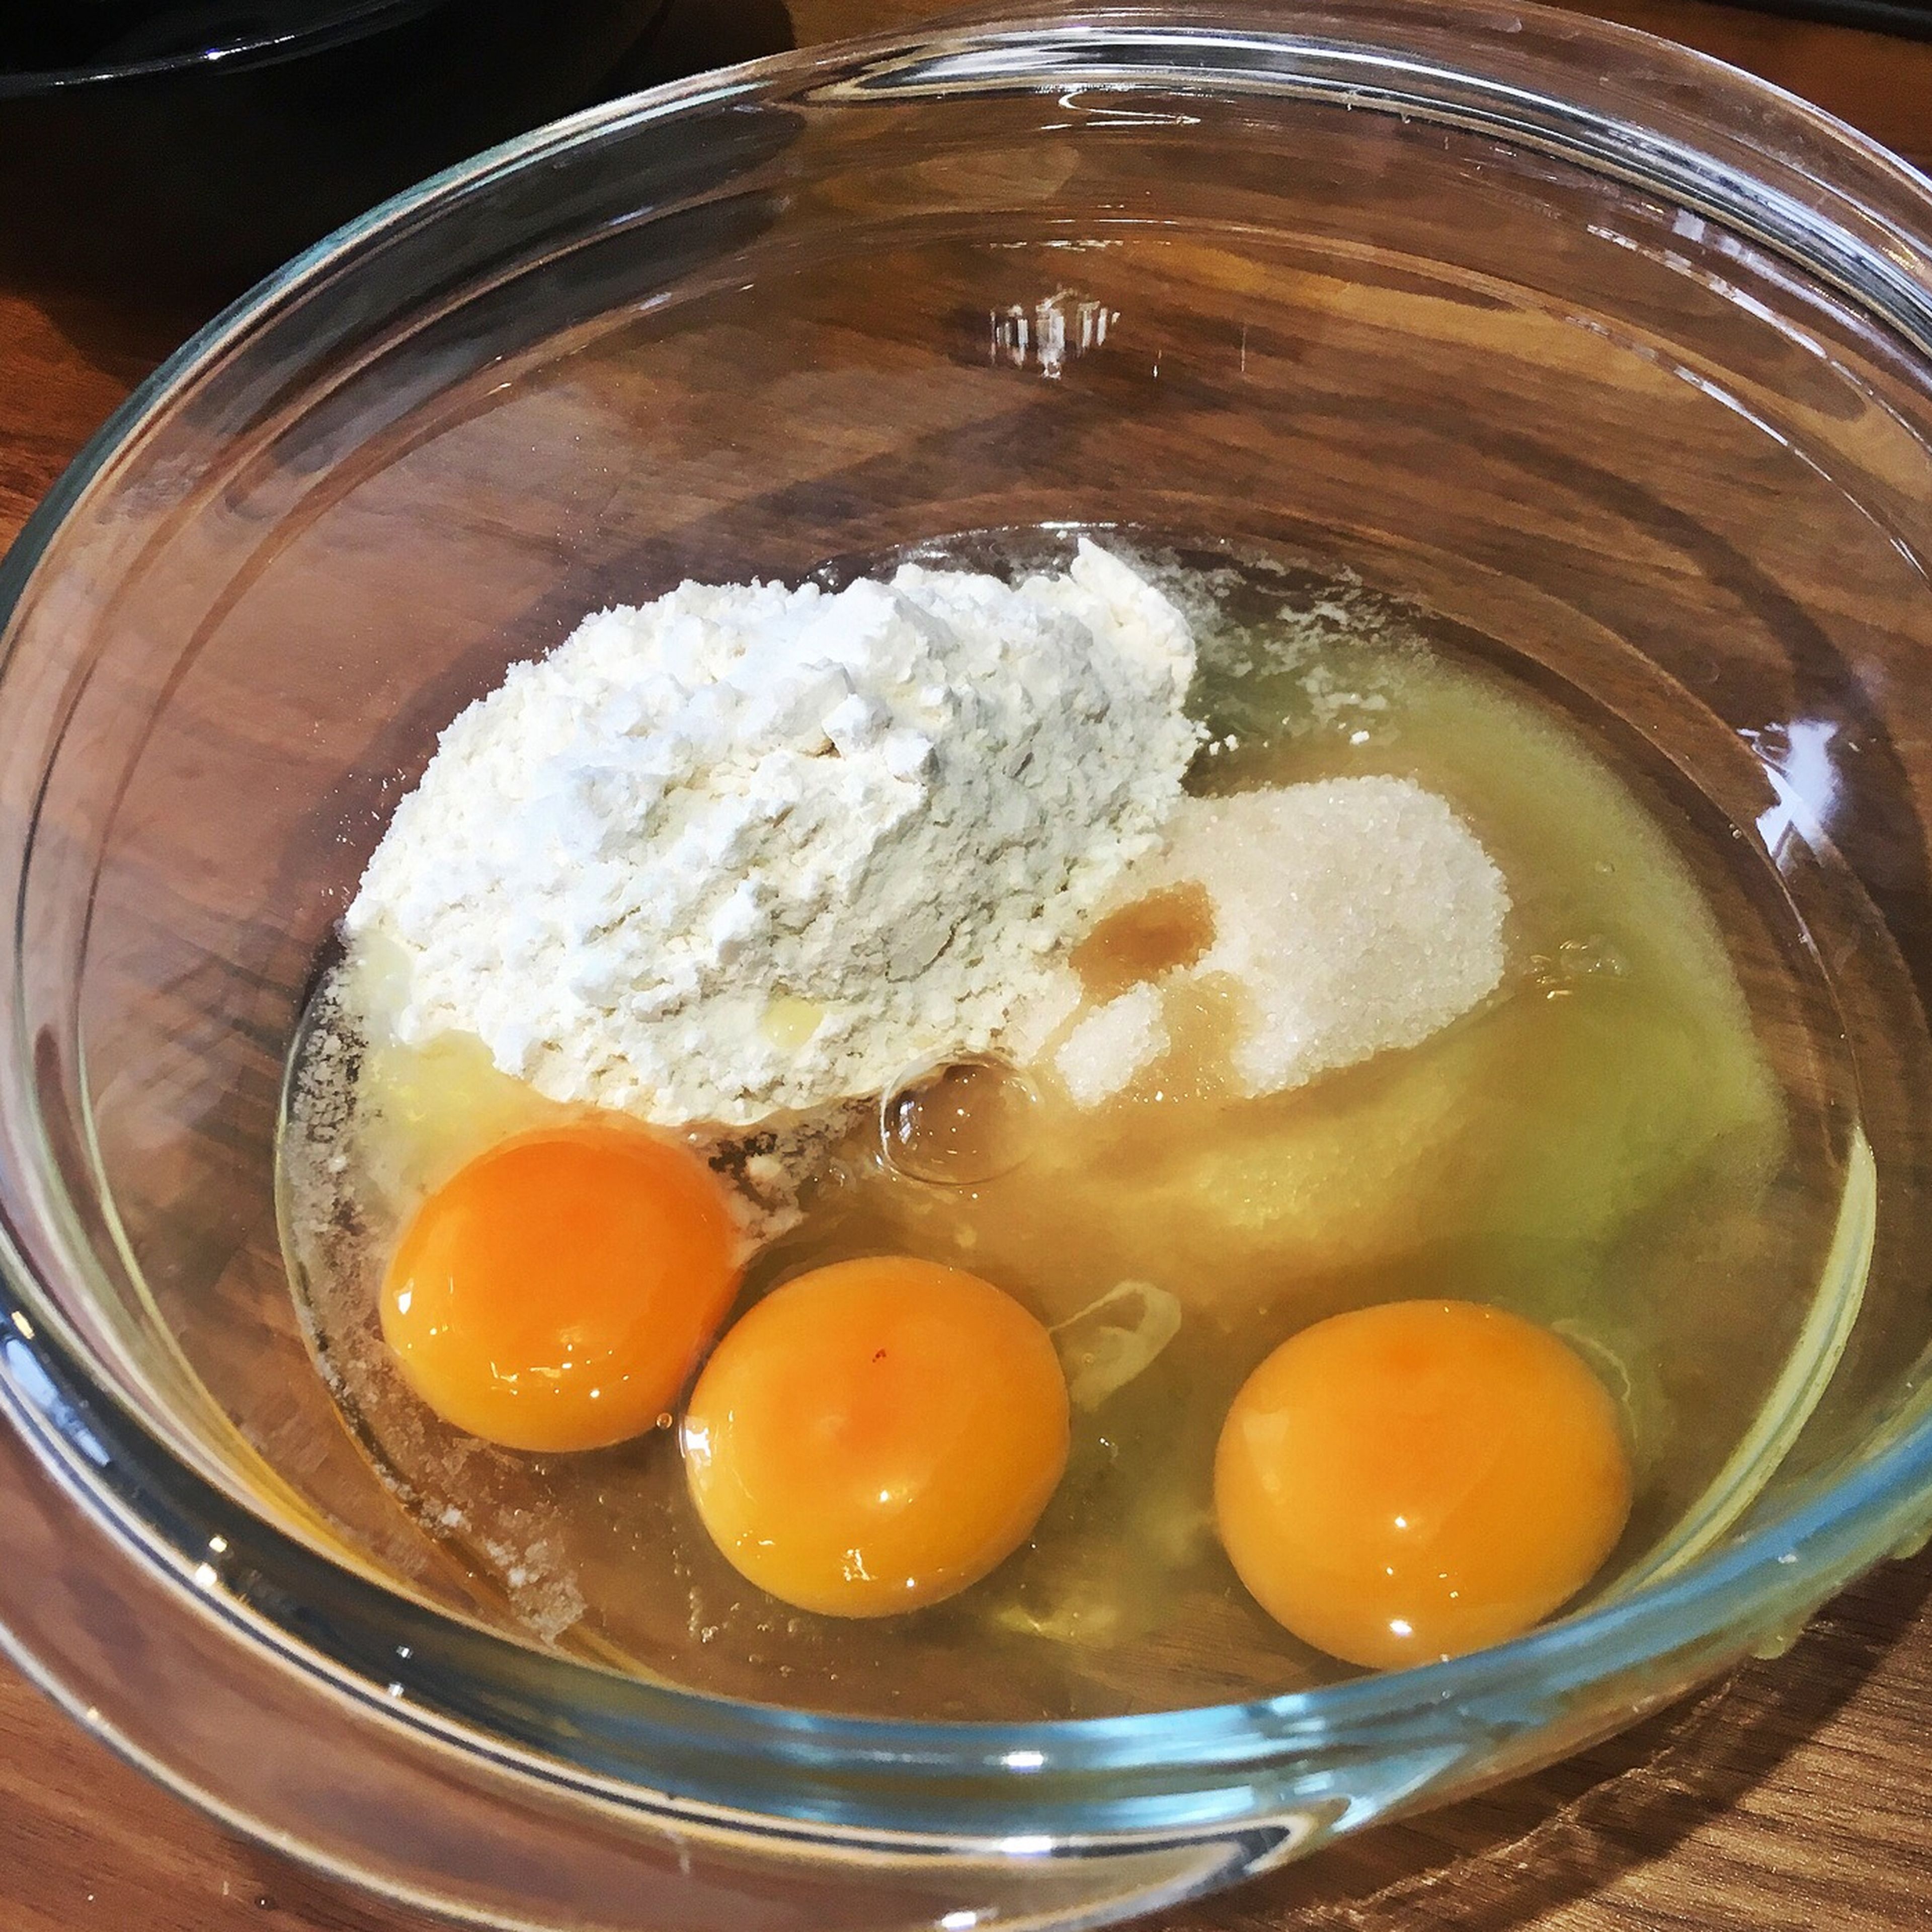 In a bowl, add the flour with the sugar and the eggs, and mix well